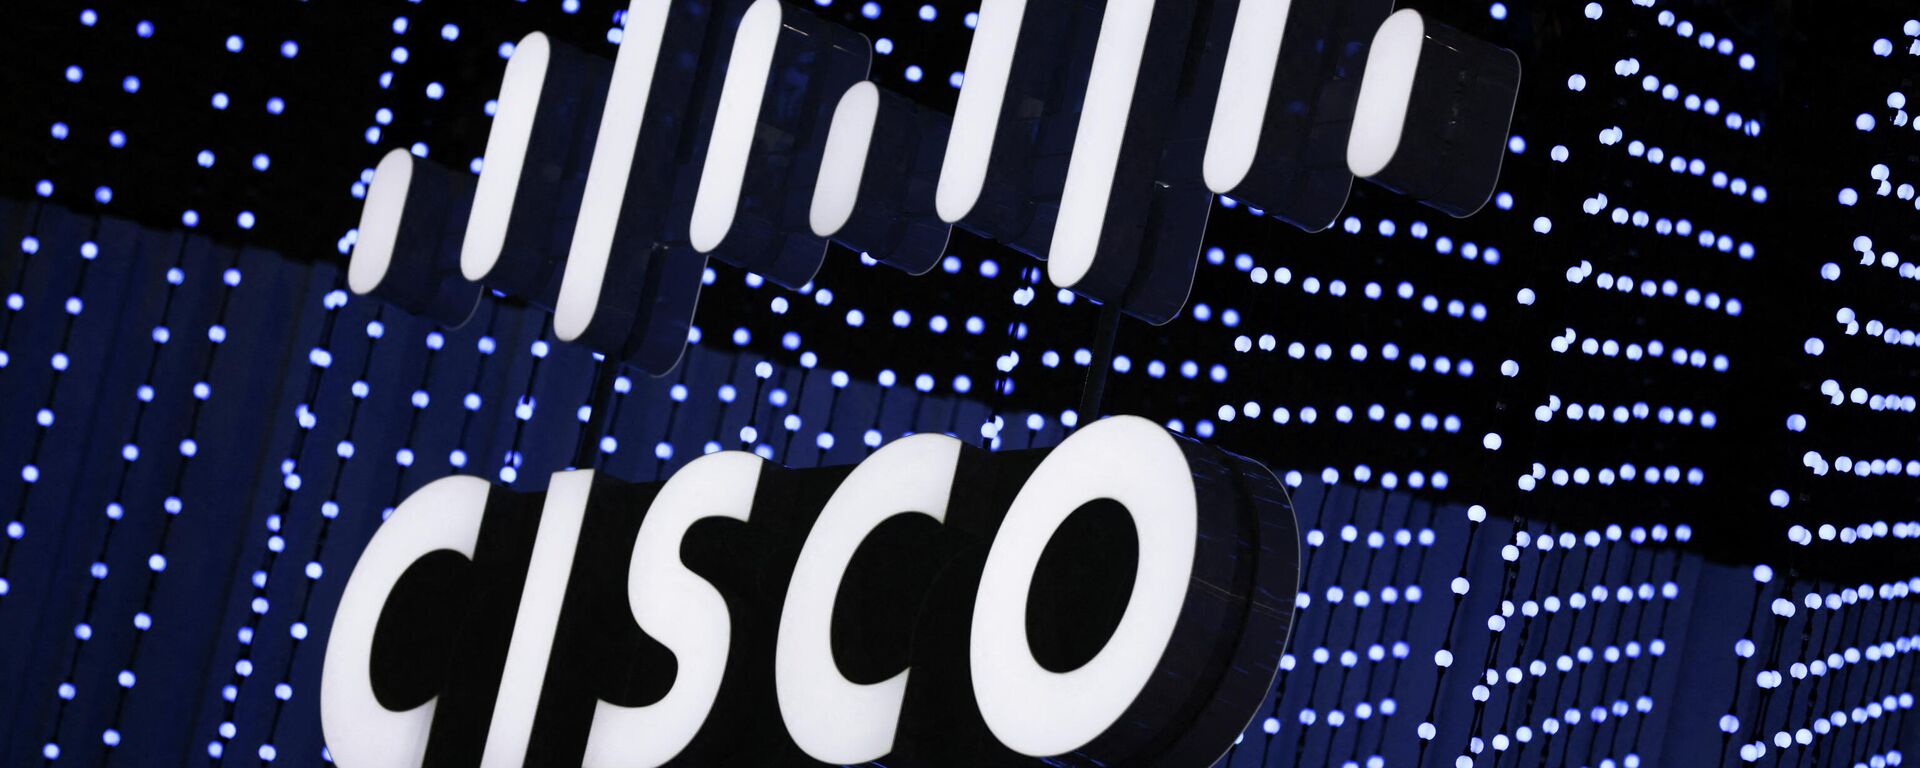 The logo of networking gear maker Cisco Systems Inc is seen during GSMA's 2022 Mobile World Congress (MWC) in Barcelona, Spain February 28, 2022. REUTERS/Nacho Doce - Sputnik International, 1920, 04.03.2022